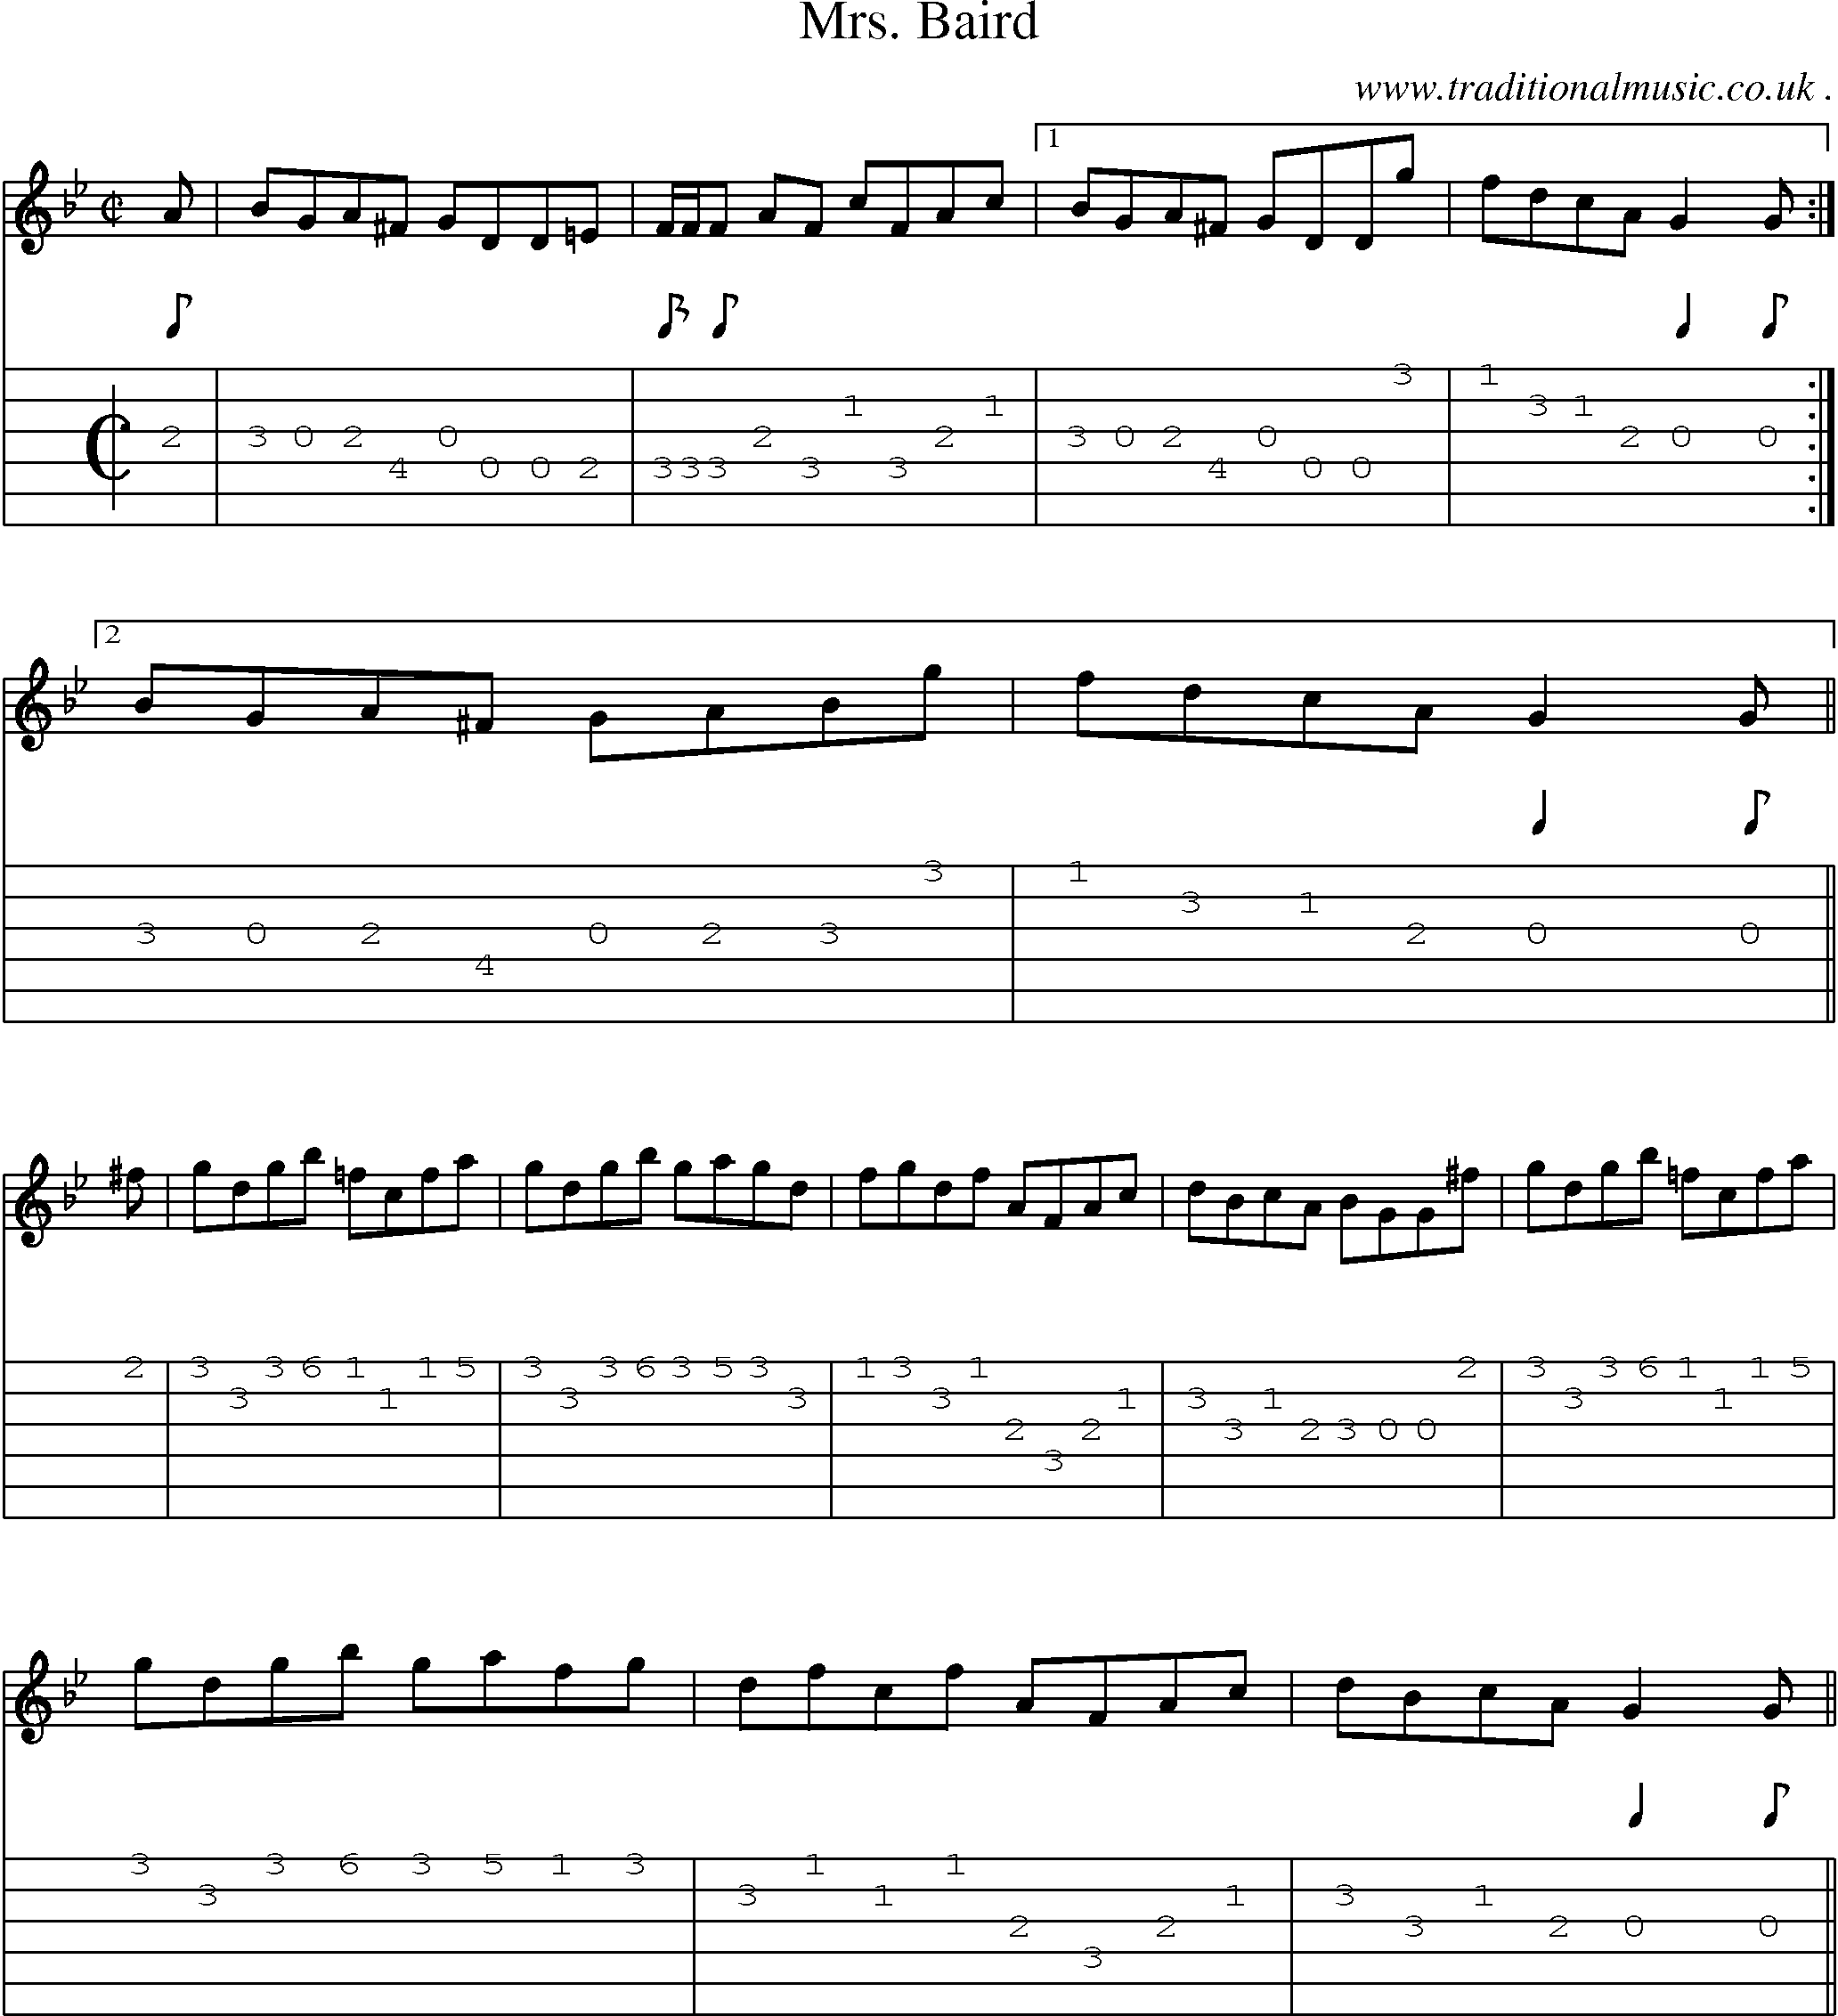 Sheet-music  score, Chords and Guitar Tabs for Mrs Baird